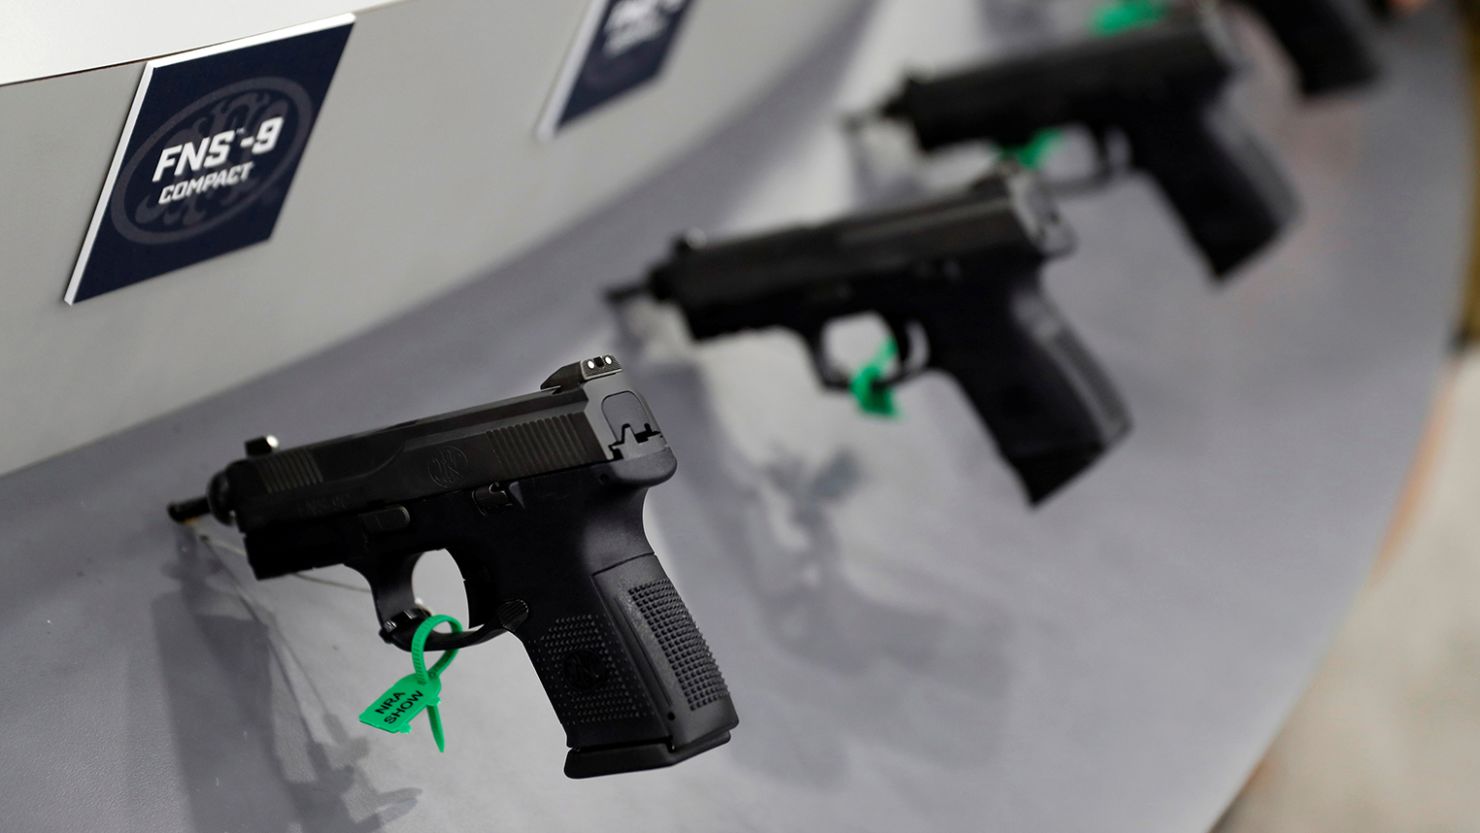 Guns are seen on display in trade booths during the National Rifle Association's annual meeting in Louisville, Kentucky, May 21, 2016.